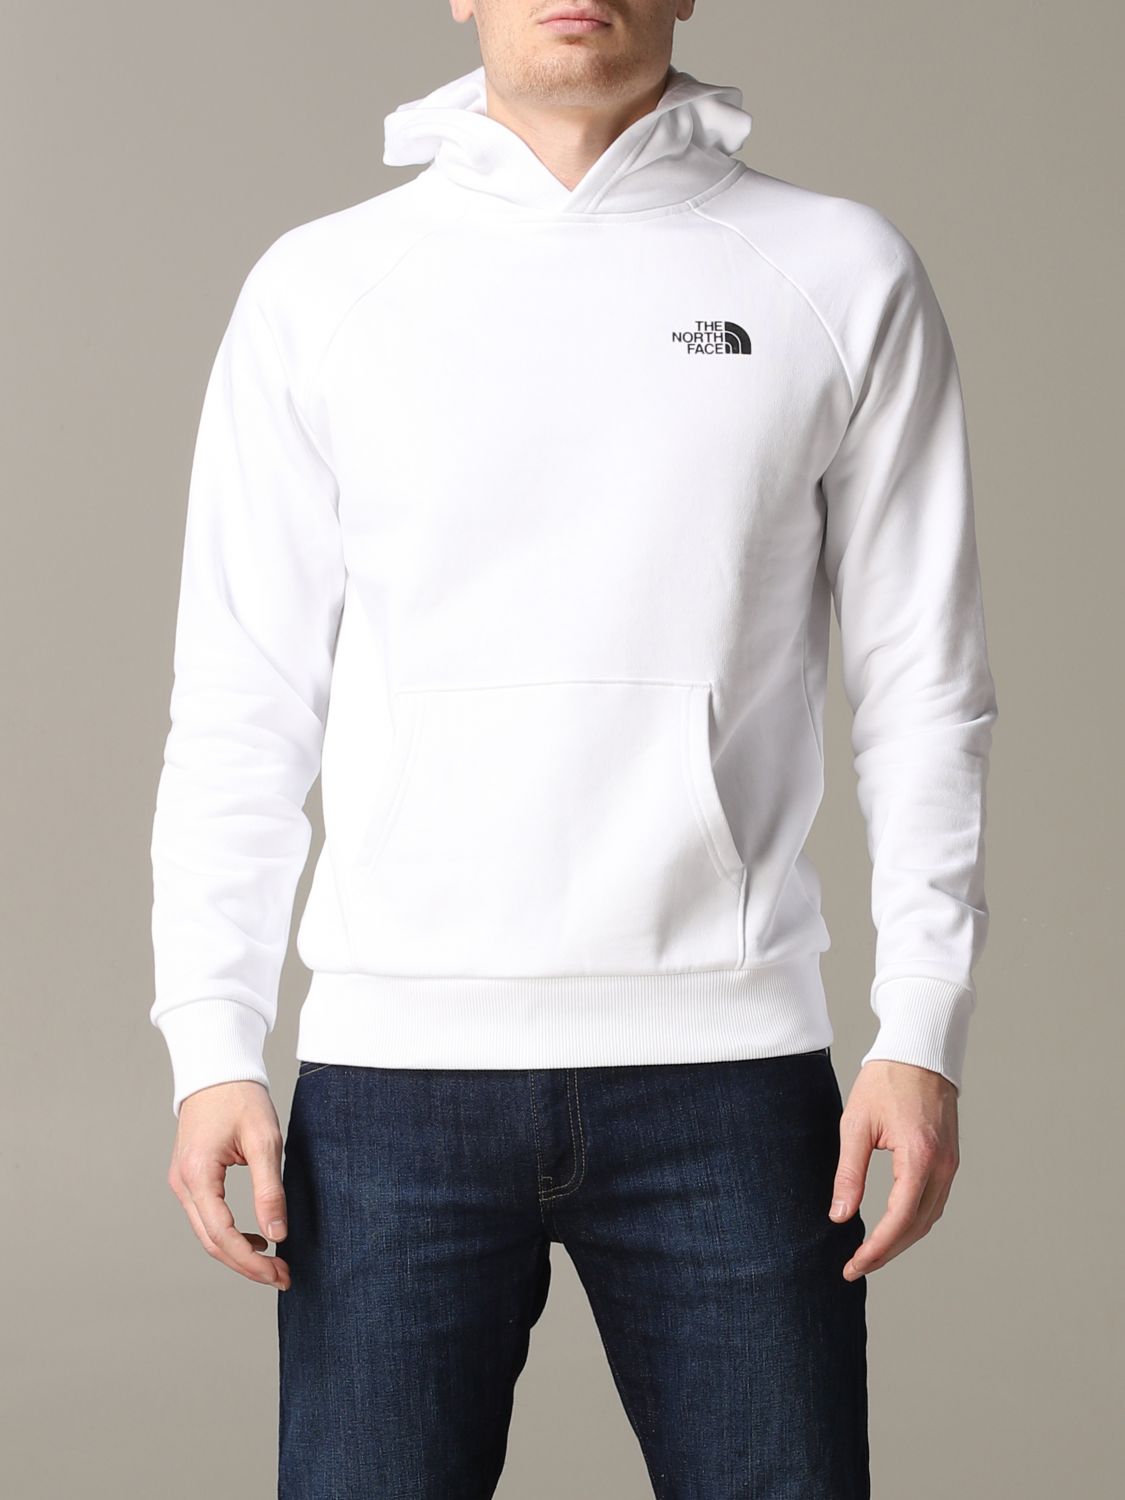 petal Re-shoot Chaise longue The North Face Outlet: sweatshirt for man - White | The North Face  sweatshirt NF0A2ZWU online on GIGLIO.COM